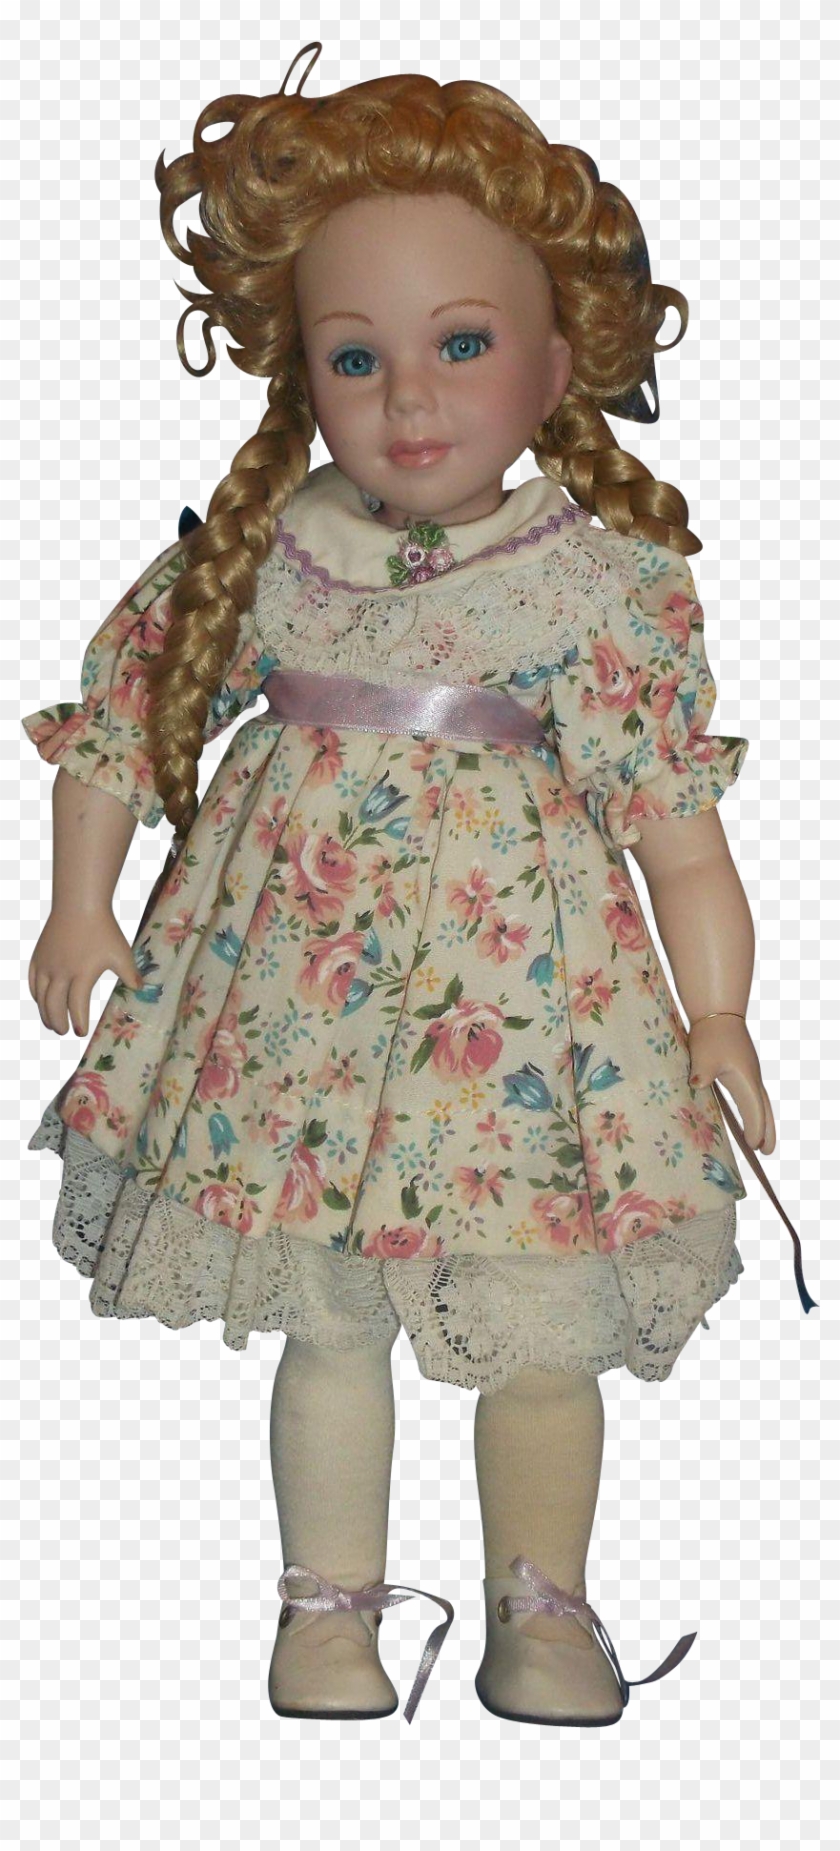 Treasures In Lace Porcelain Doll Blonde Hair Braids - Creepy Dolls No Background Clipart #4026942